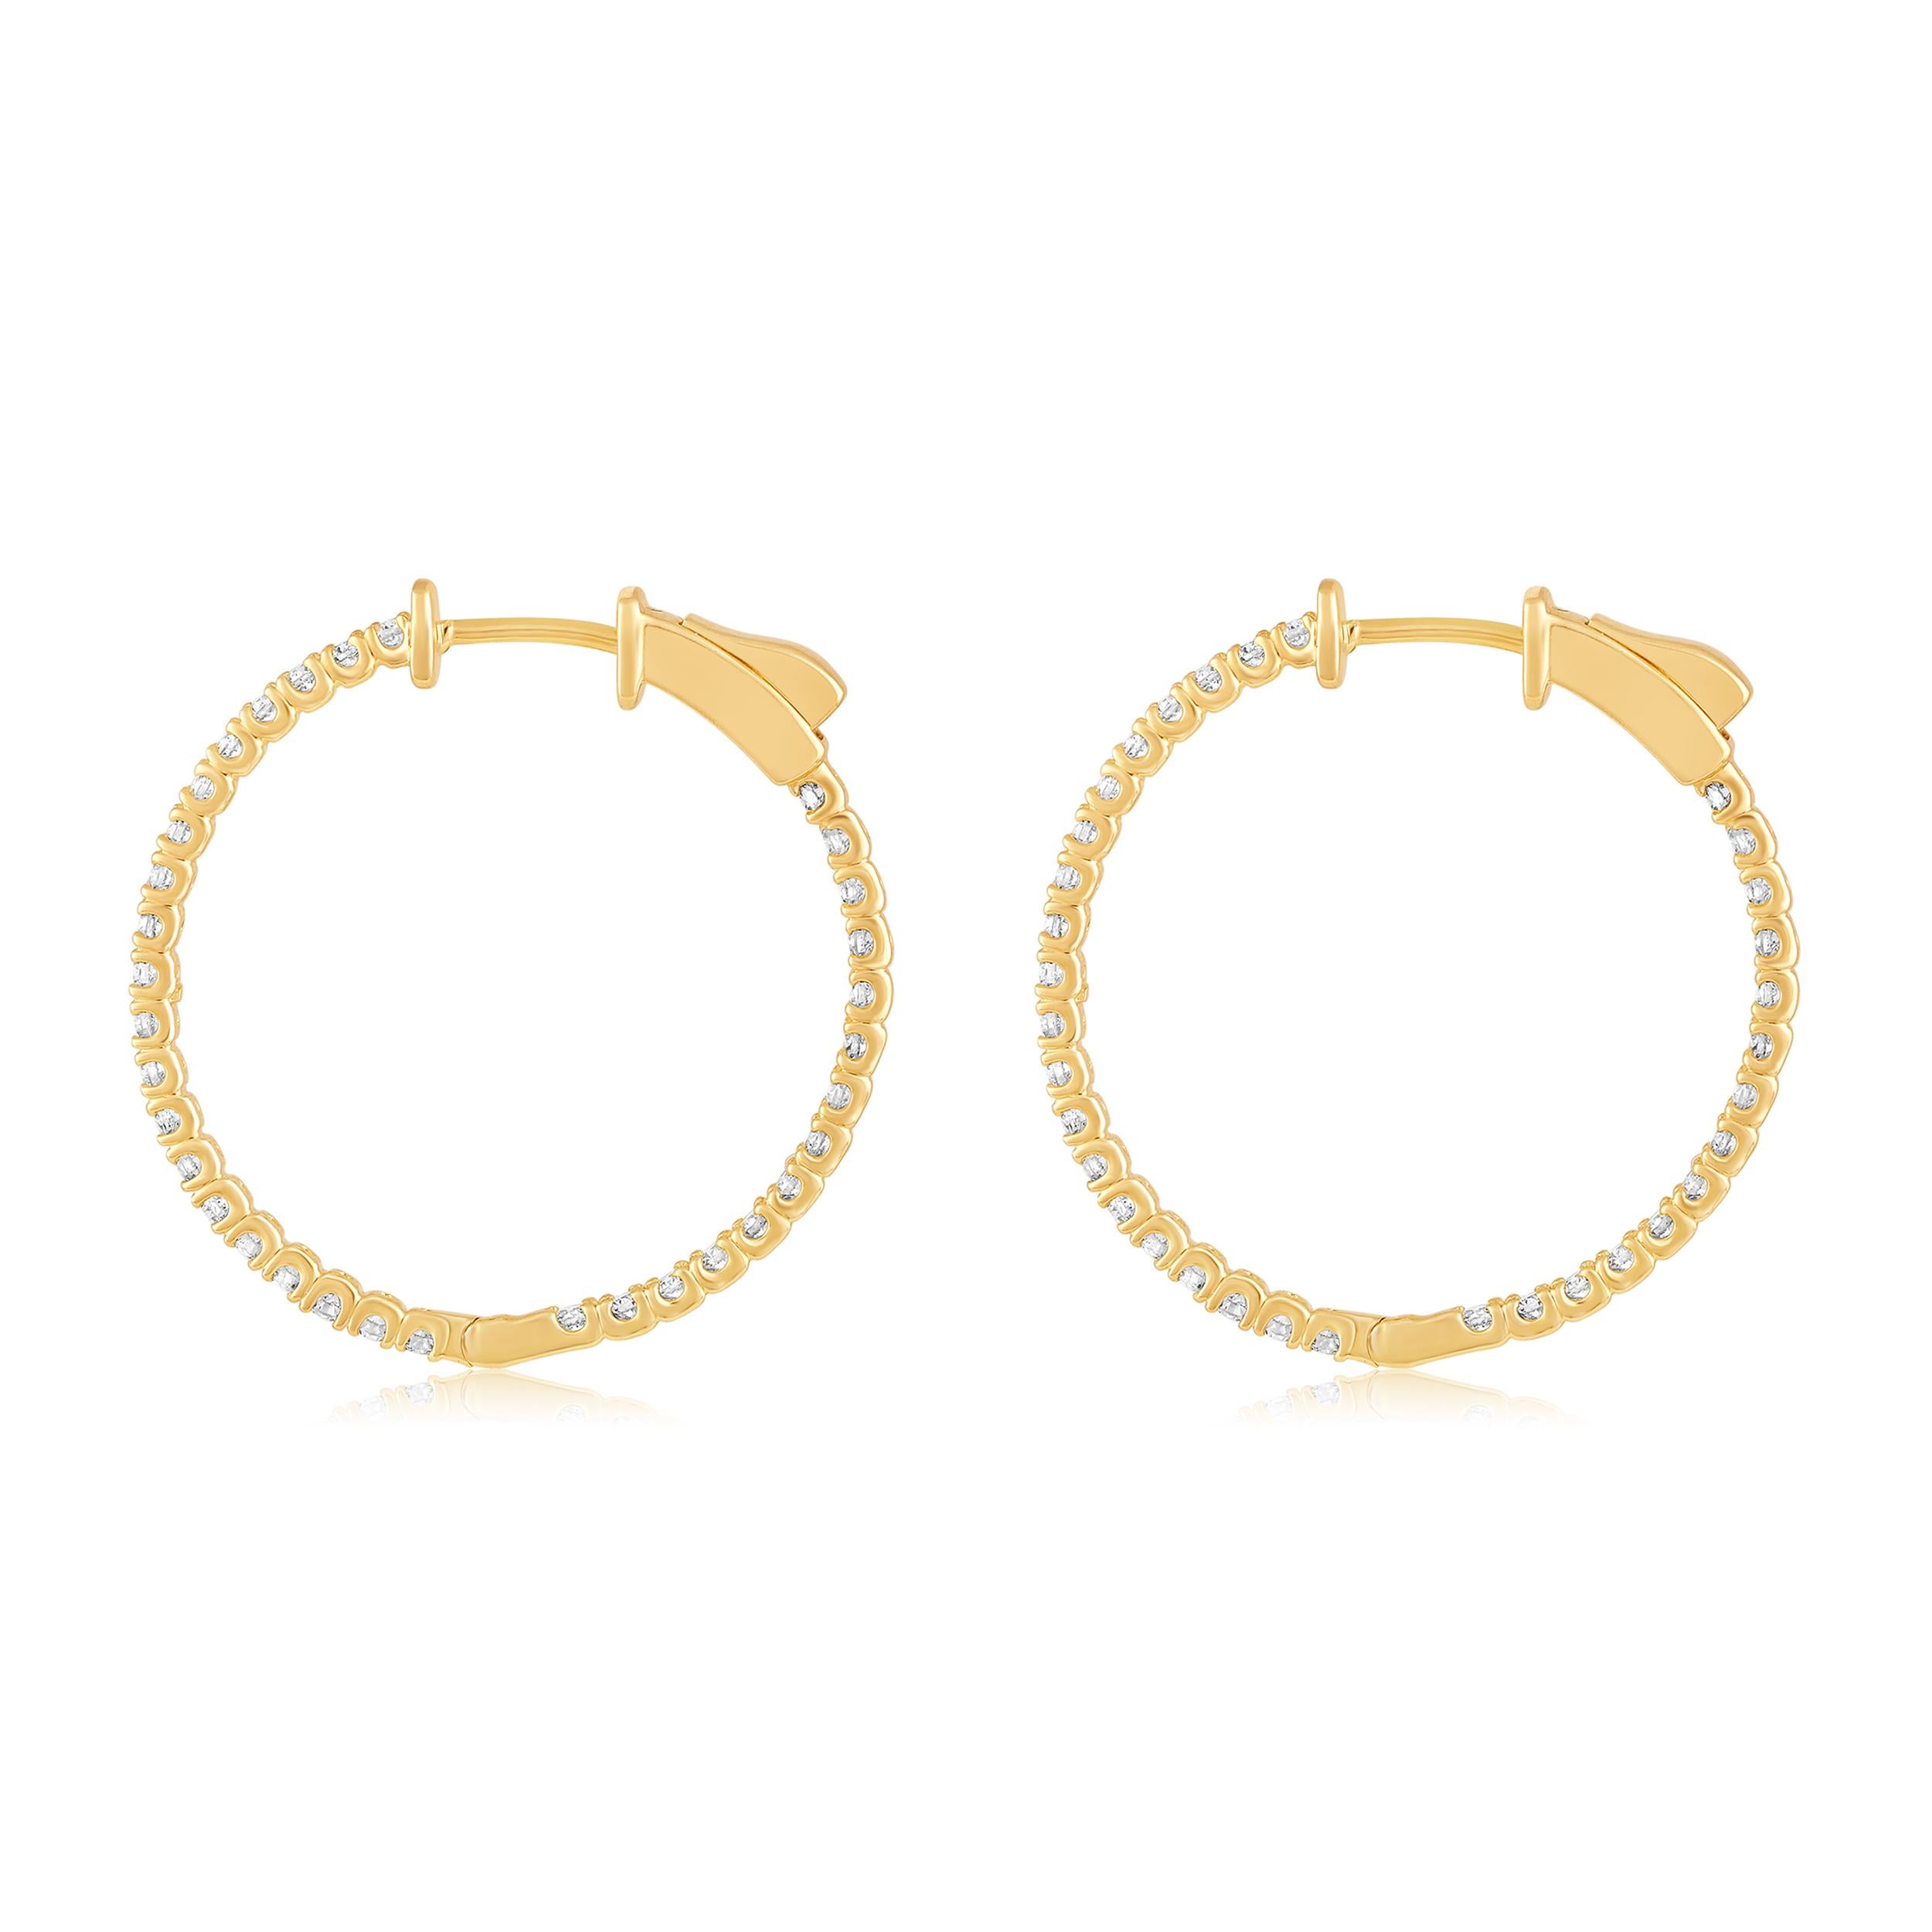 Brilliant Cut Certified 14k Gold 1 Carat Natural Diamond Round Inside Out Hoop Earrings For Sale